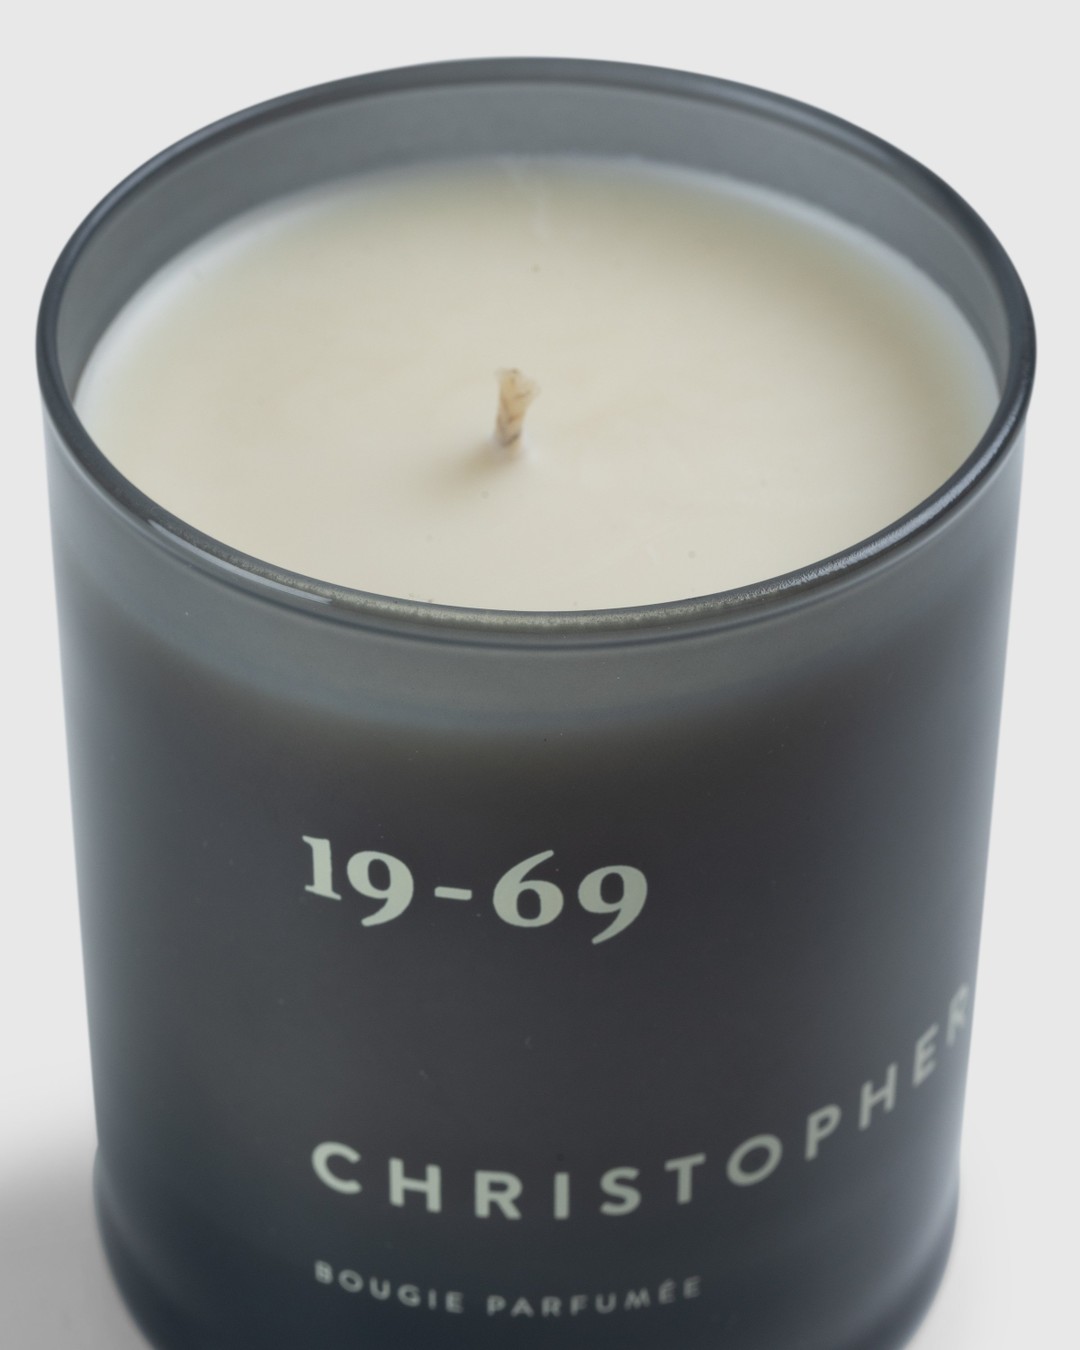 19-69 – Christopher BP Candle - Candles & Fragrances - Grey - Image 3